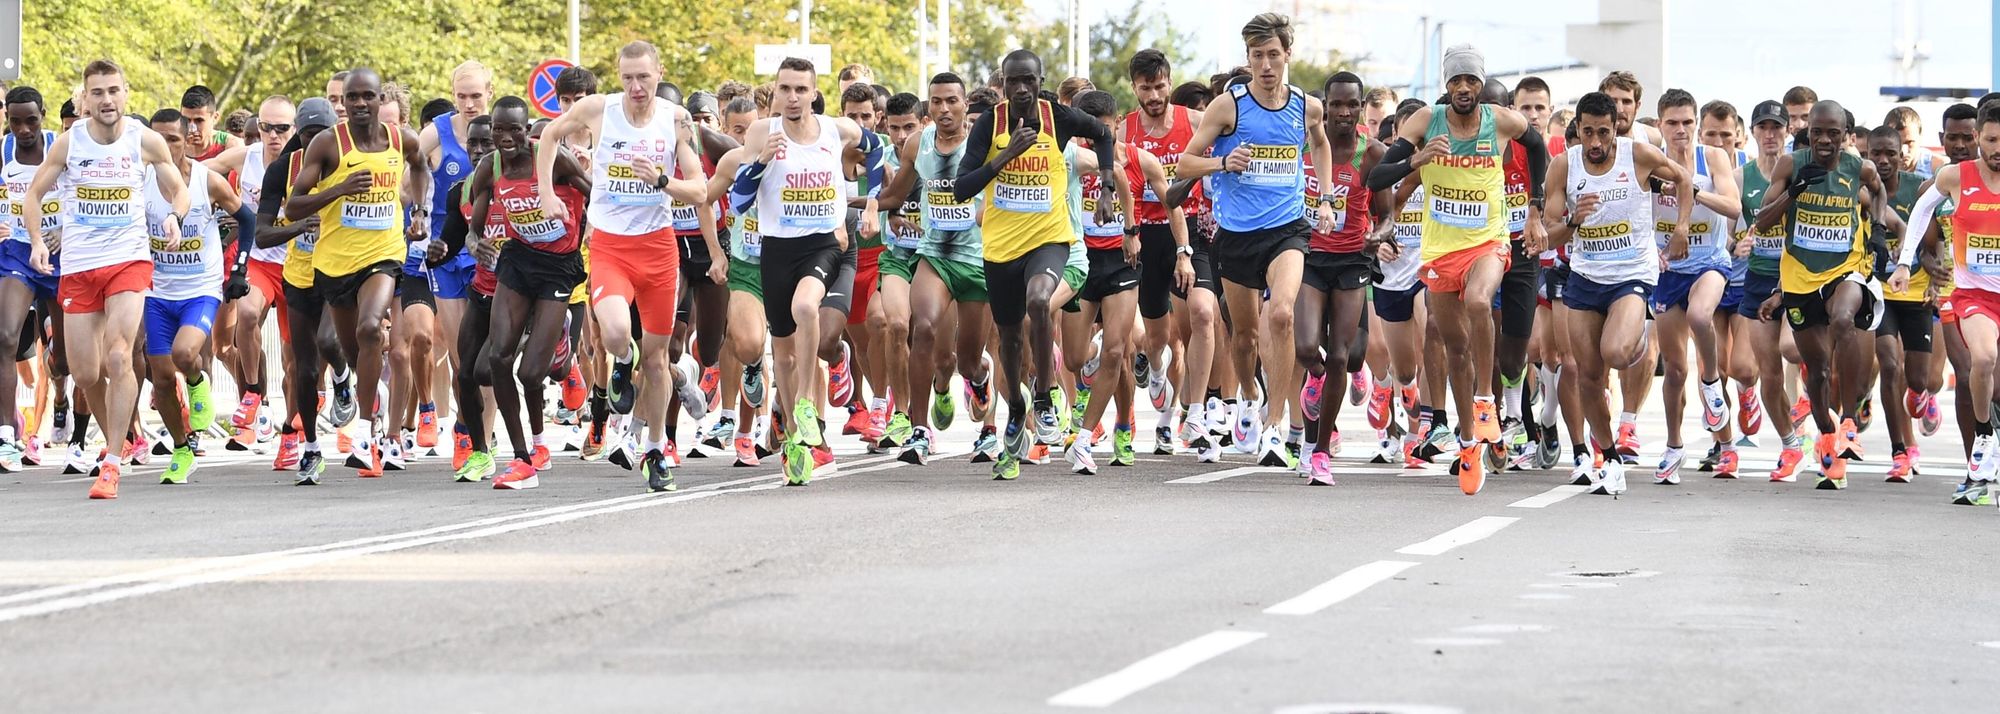 Twelve cities want to host the first World Athletics Road Running